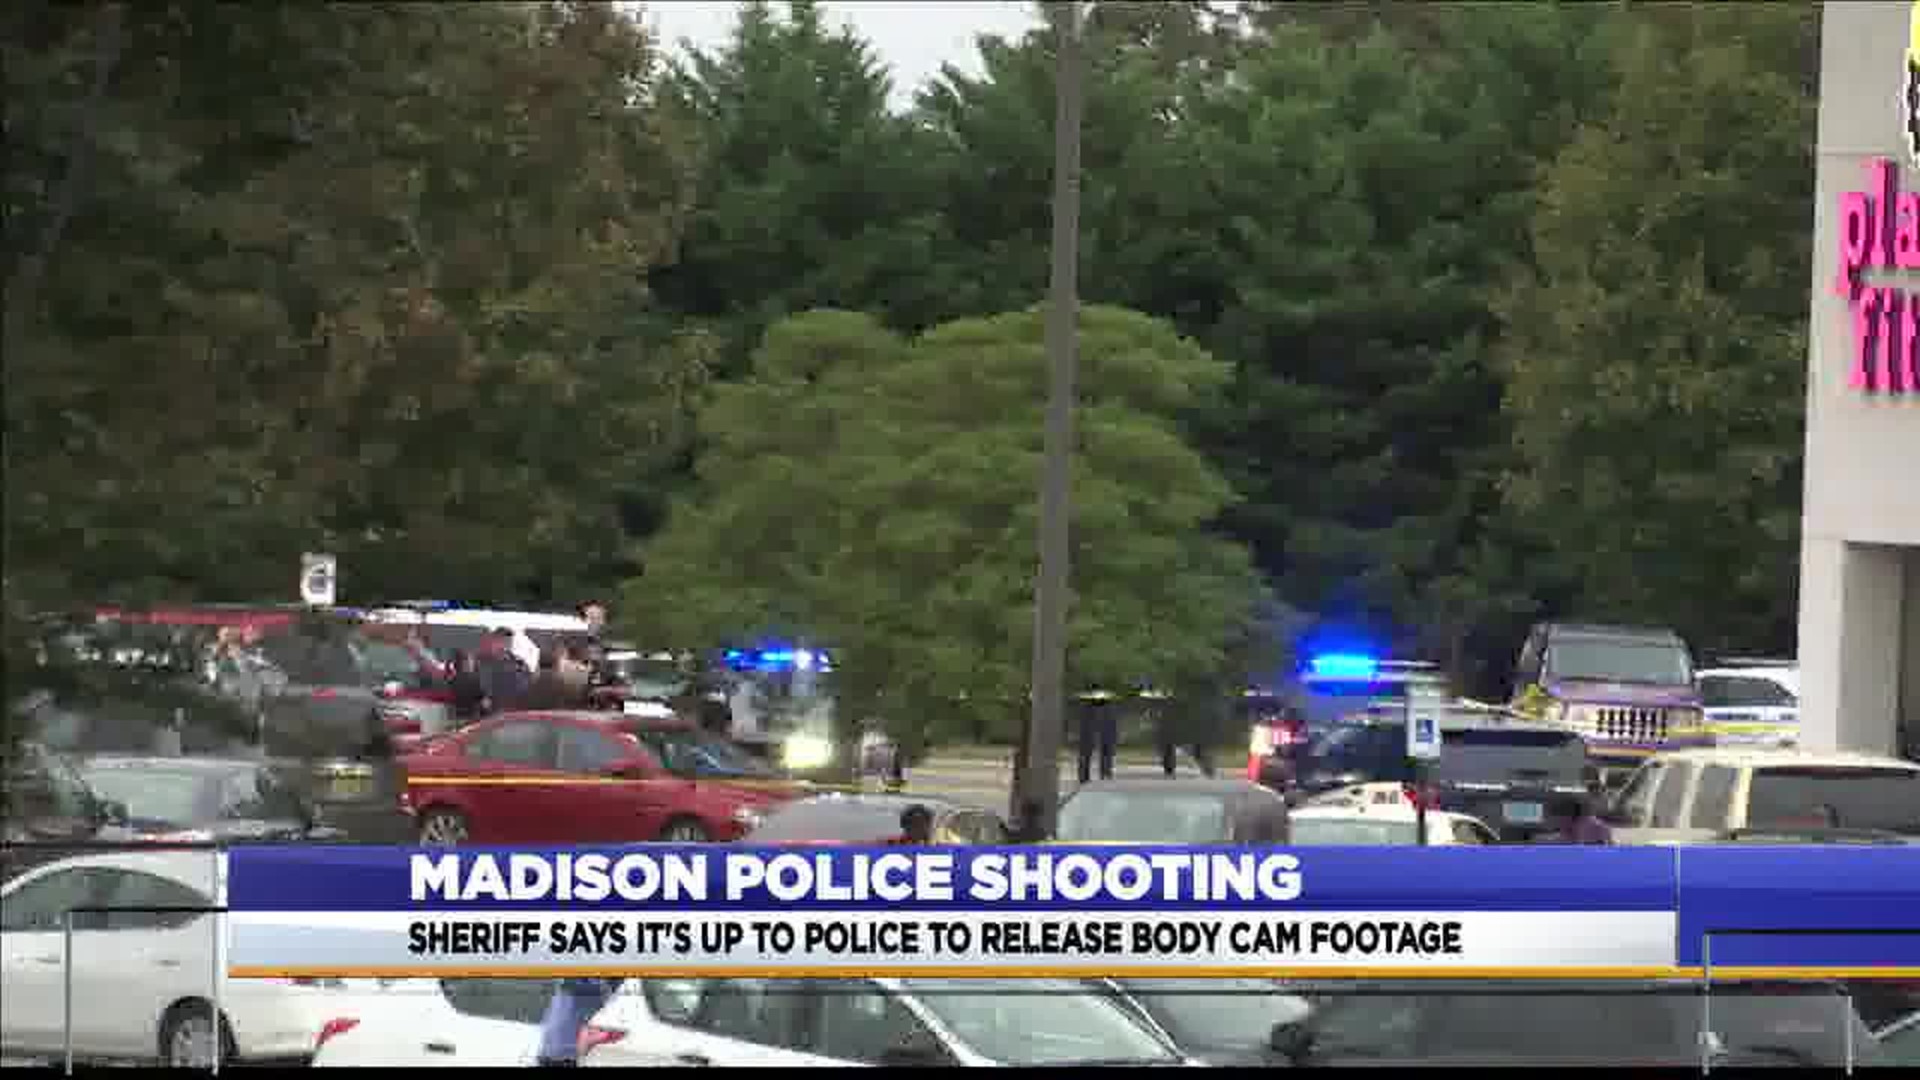 The Madison County Sheriff's Office held a press conference Thursday afternoon, Nov. 7, on their investigation into the Madison Police officer-involved shooting that killed Dana Fletcher on Oct. 27.